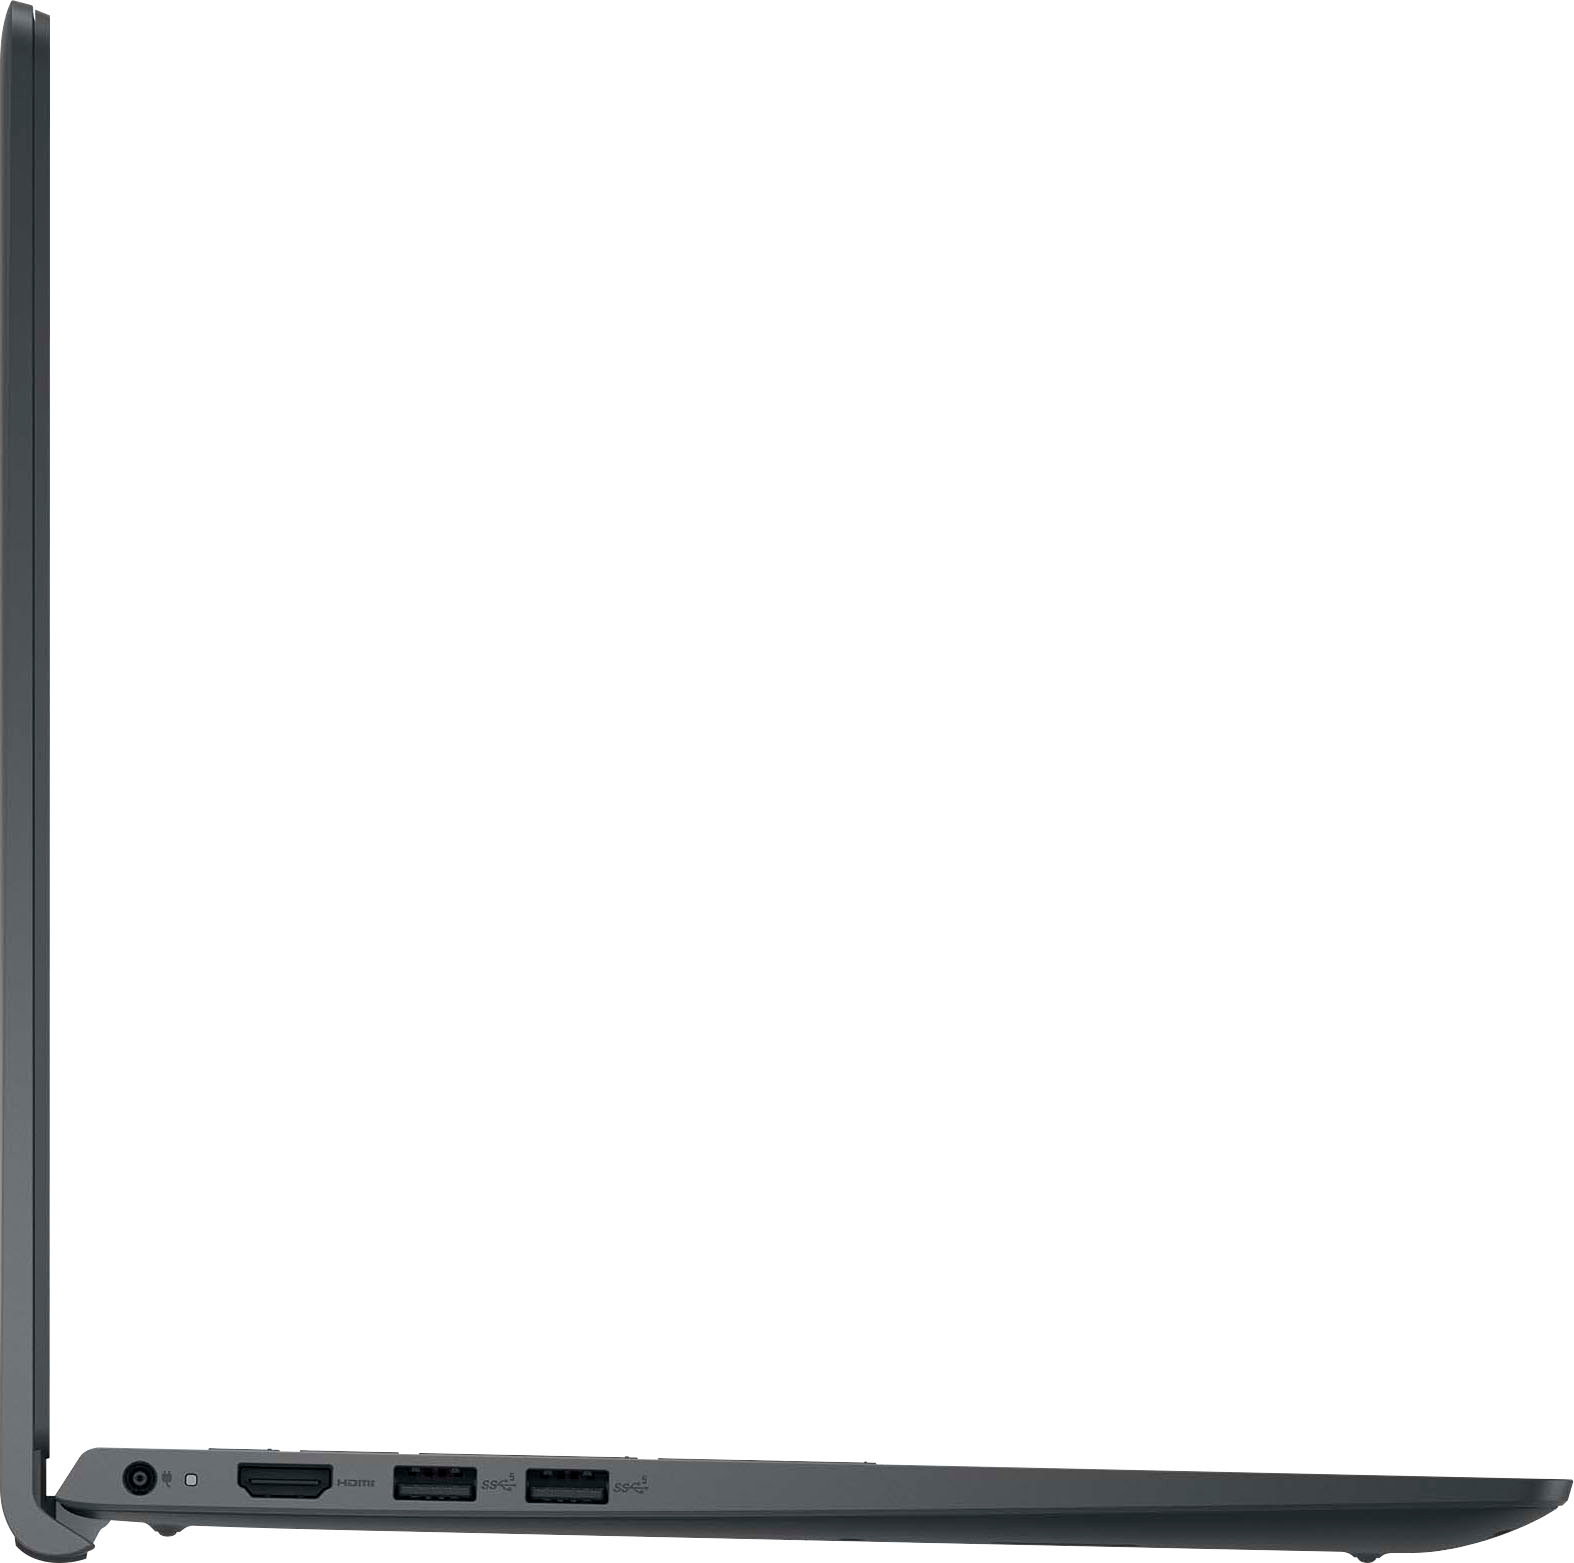 Dell Inspiron 15 3520 Touch Laptop Intel Core i5 8GB Memory 256GB SSD  Carbon Black i3520-5810BLK-PUS - Best Buy